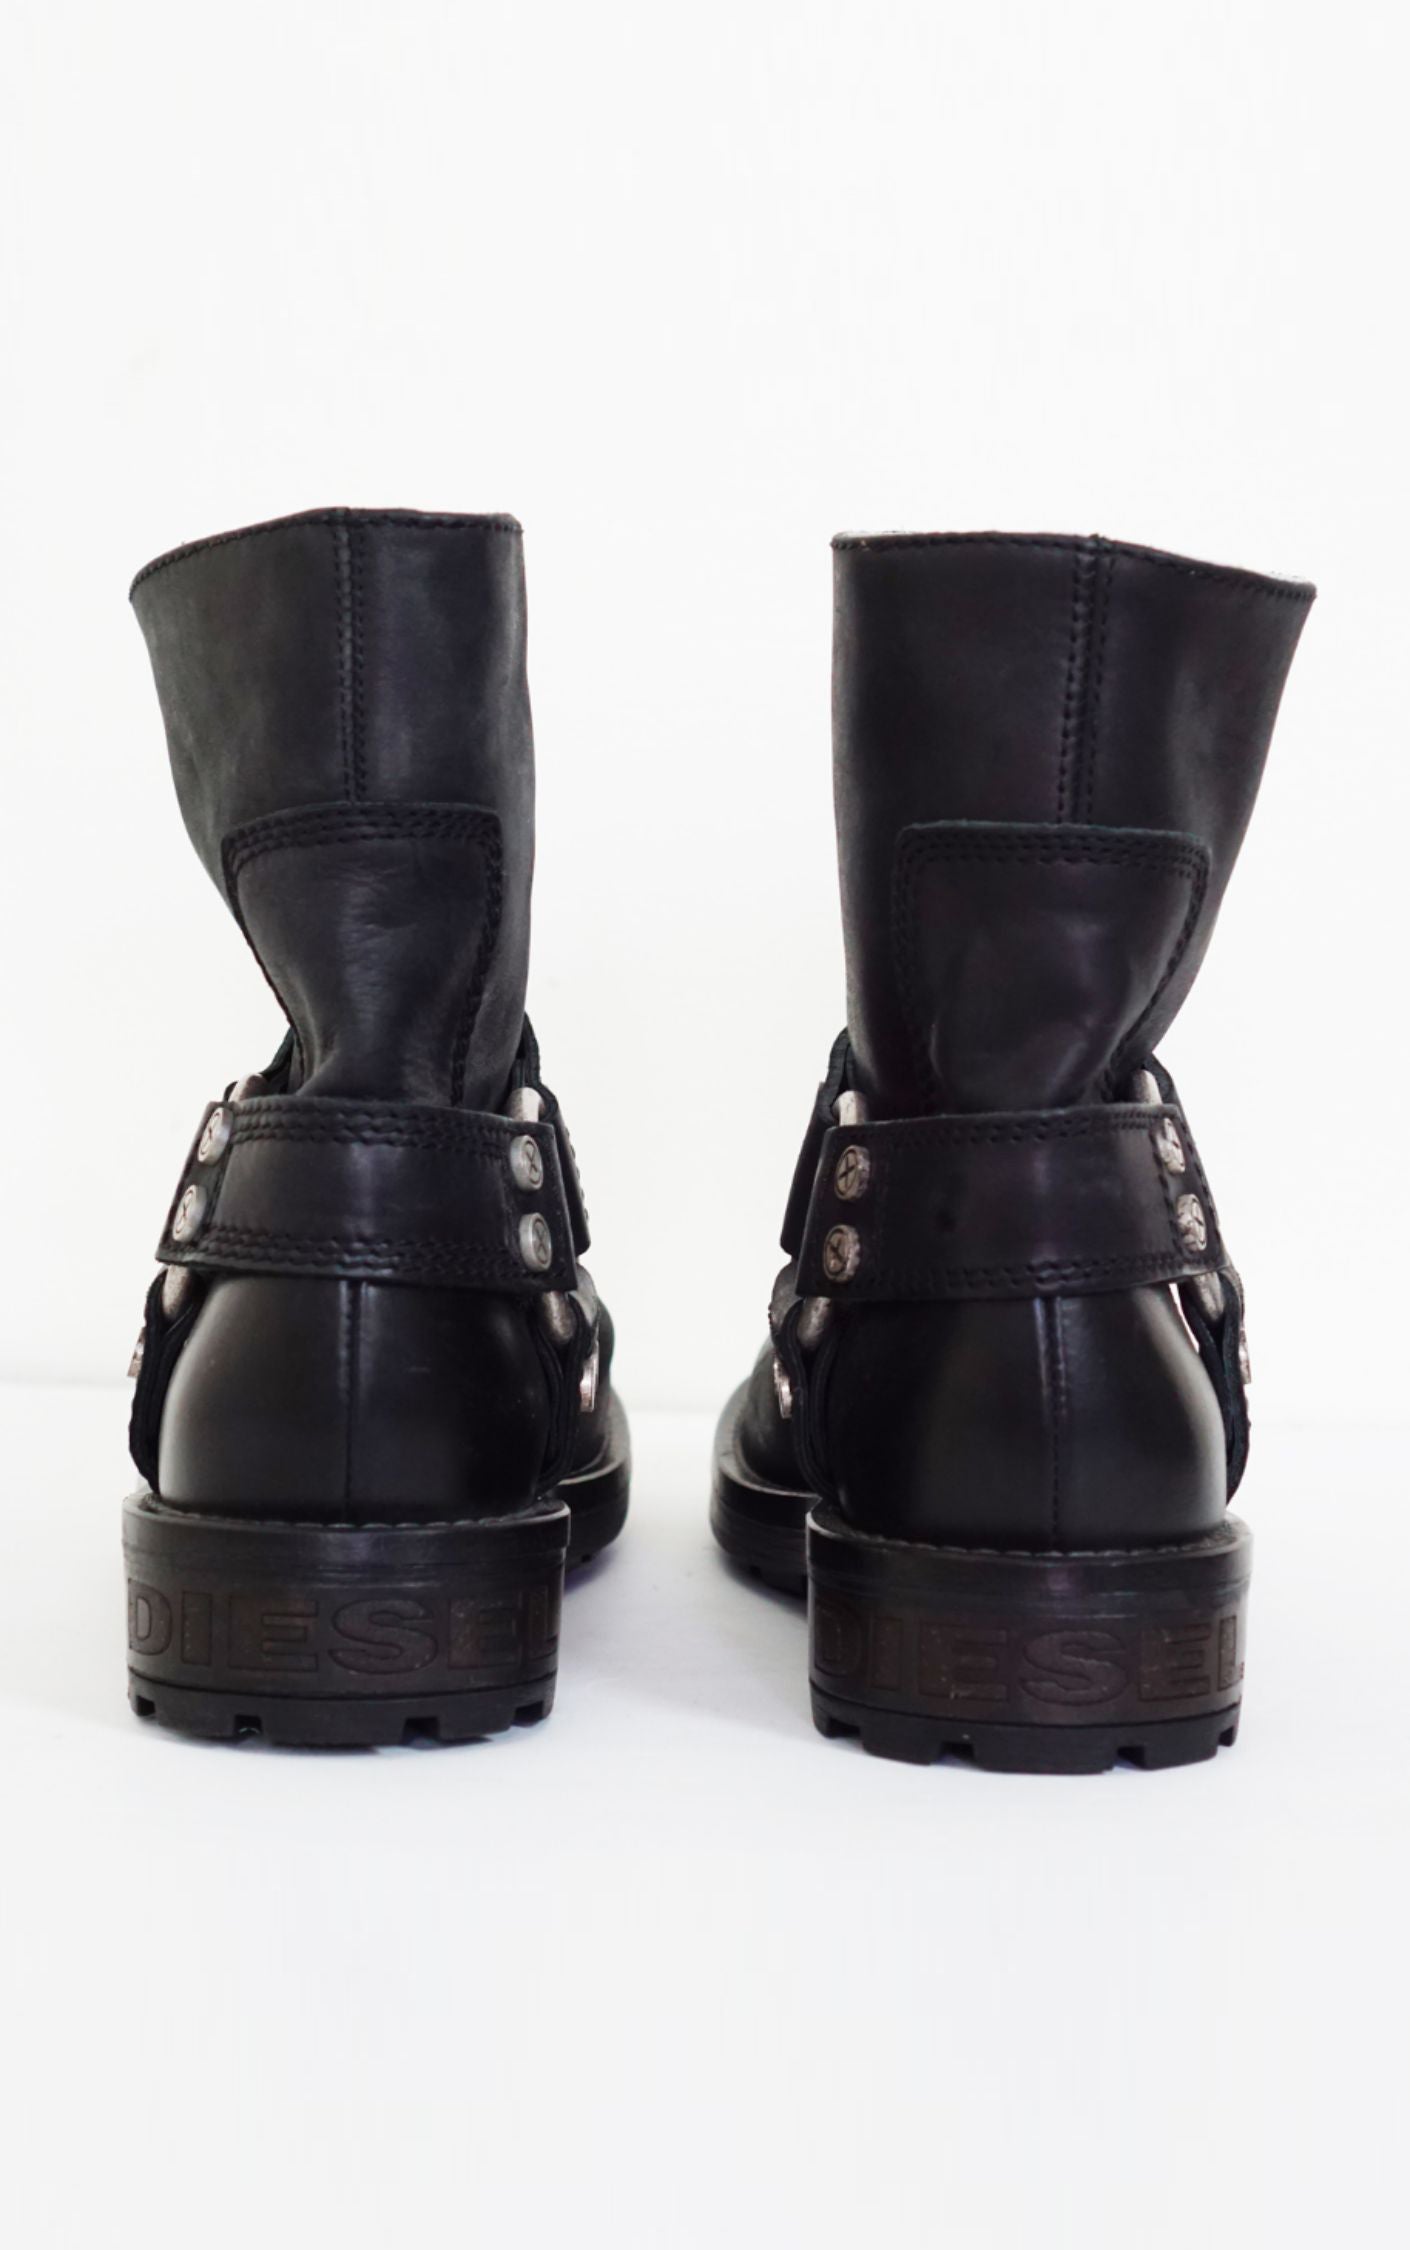 DIESEL Leather Biker Ankle Boots resellum